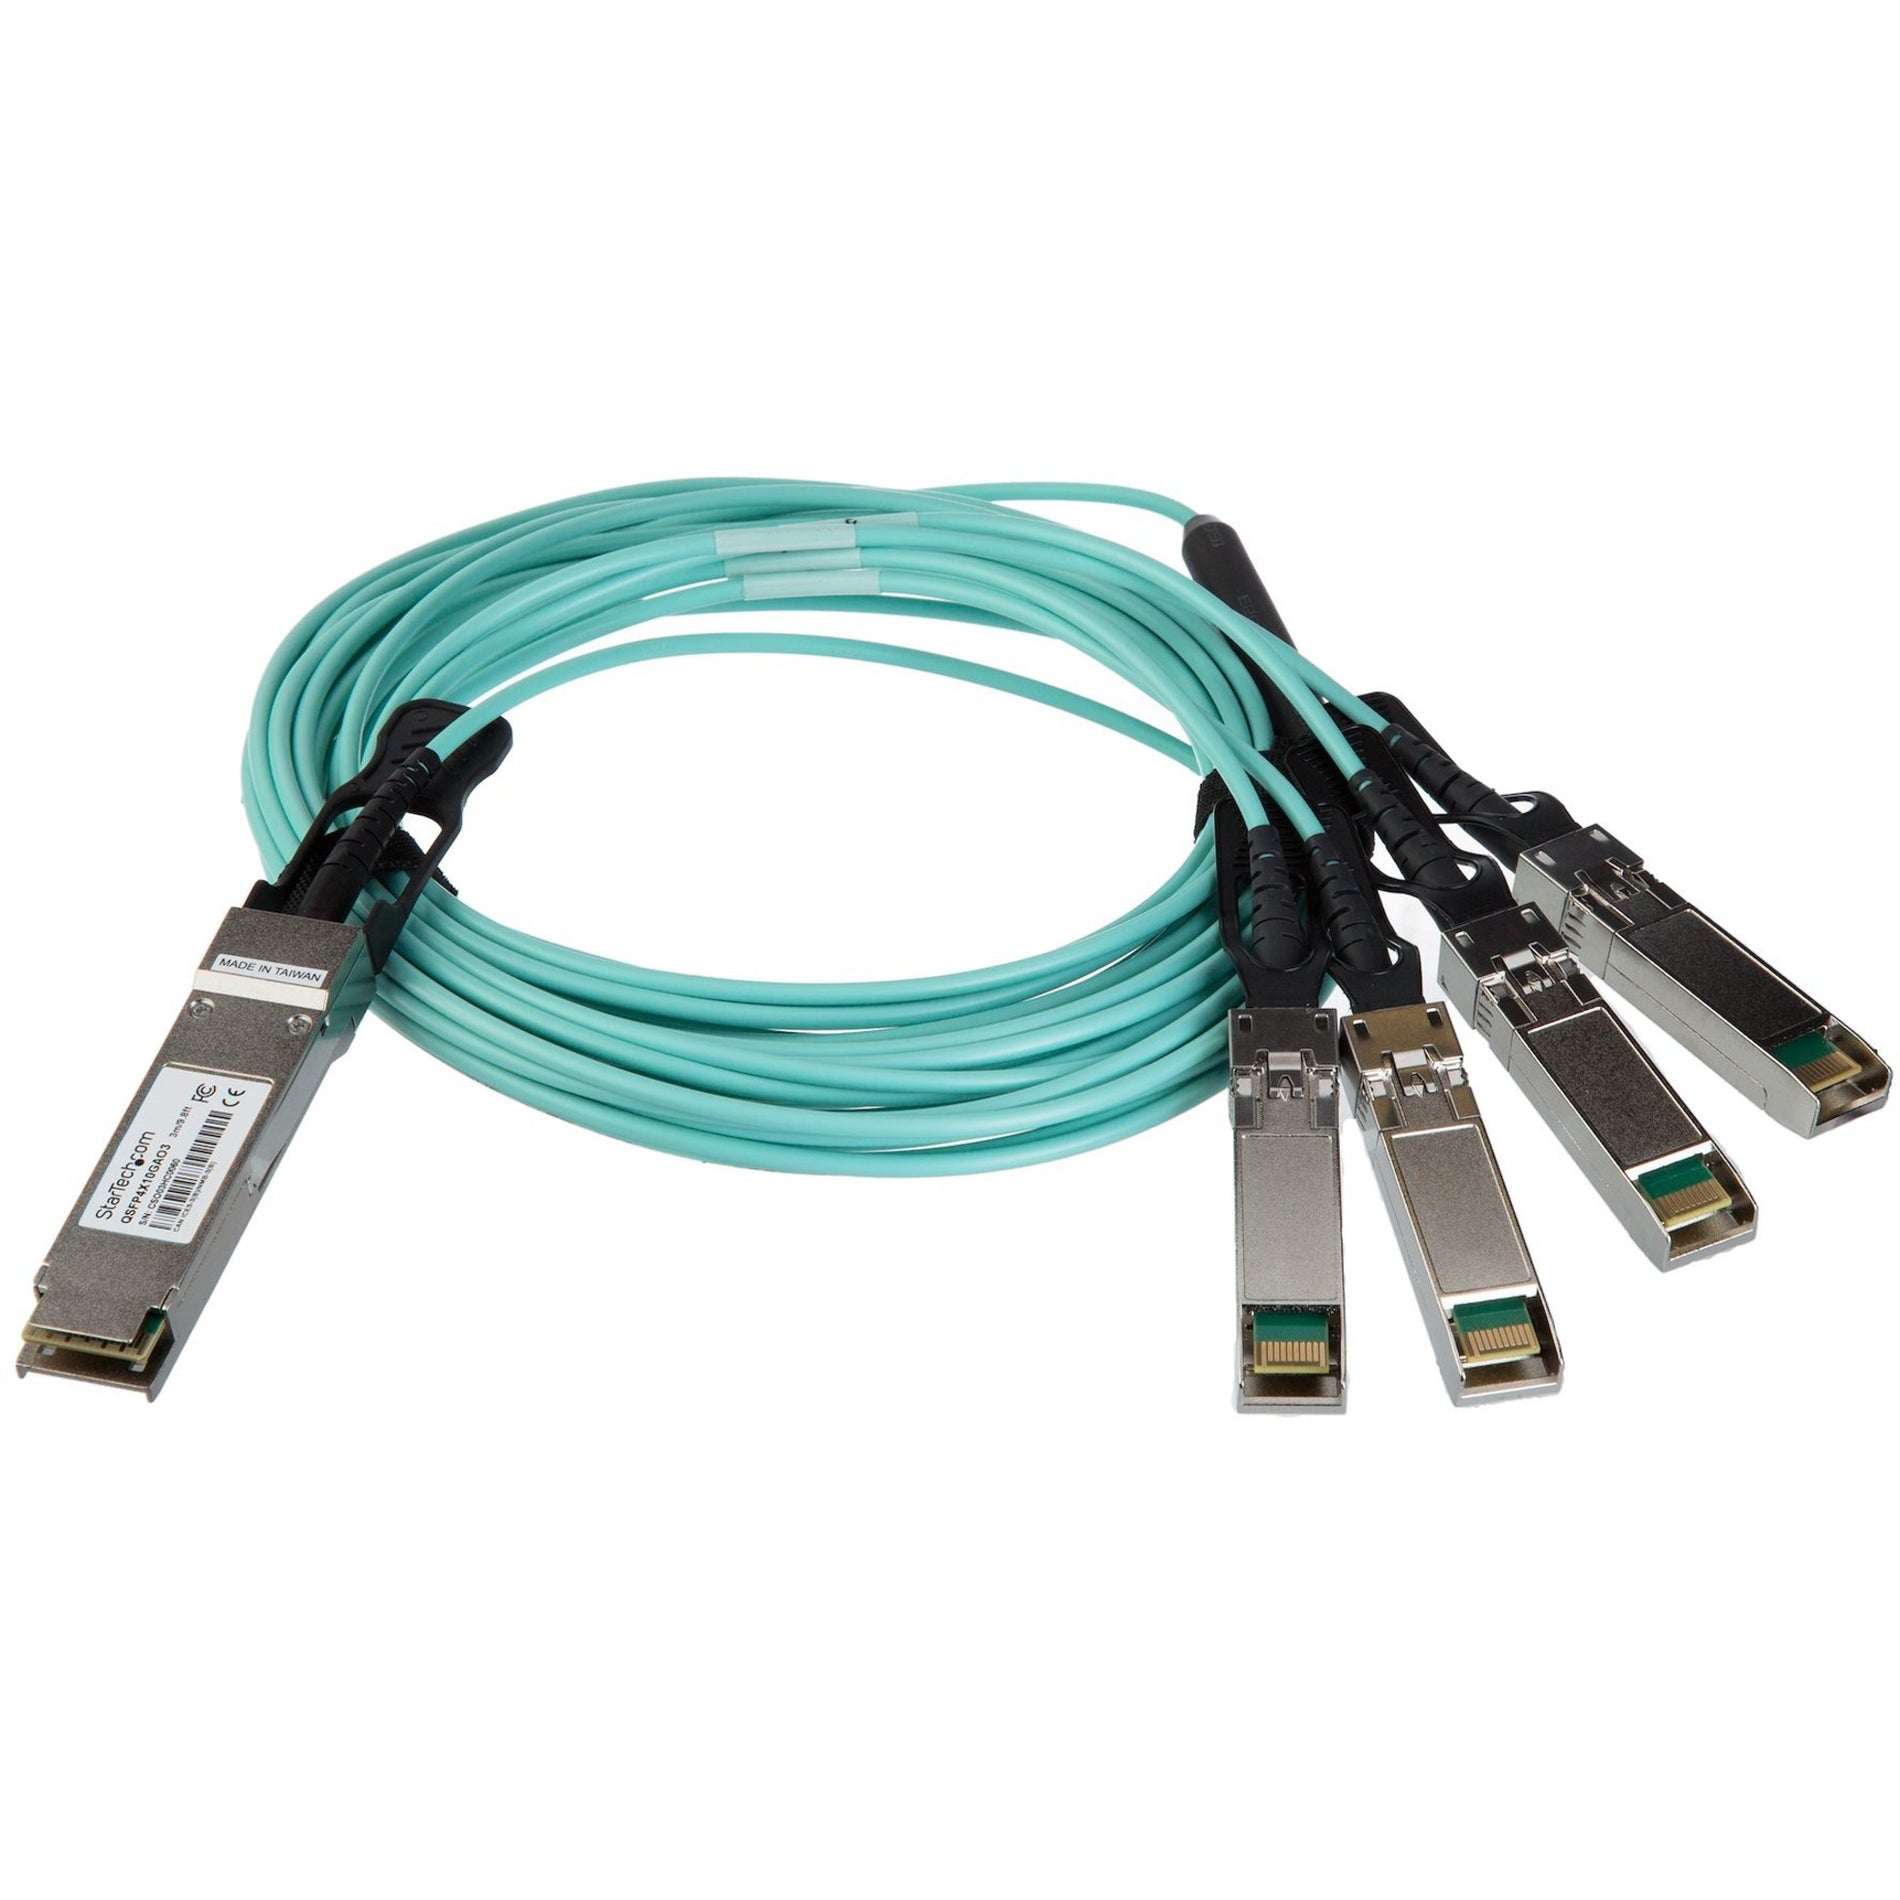 StarTech.com QSFP4X10GAO3 QSFP+ to 4x SFP+ - 3 m (9.8 ft.) Network Cable, Active, Hot-swappable, Flexible